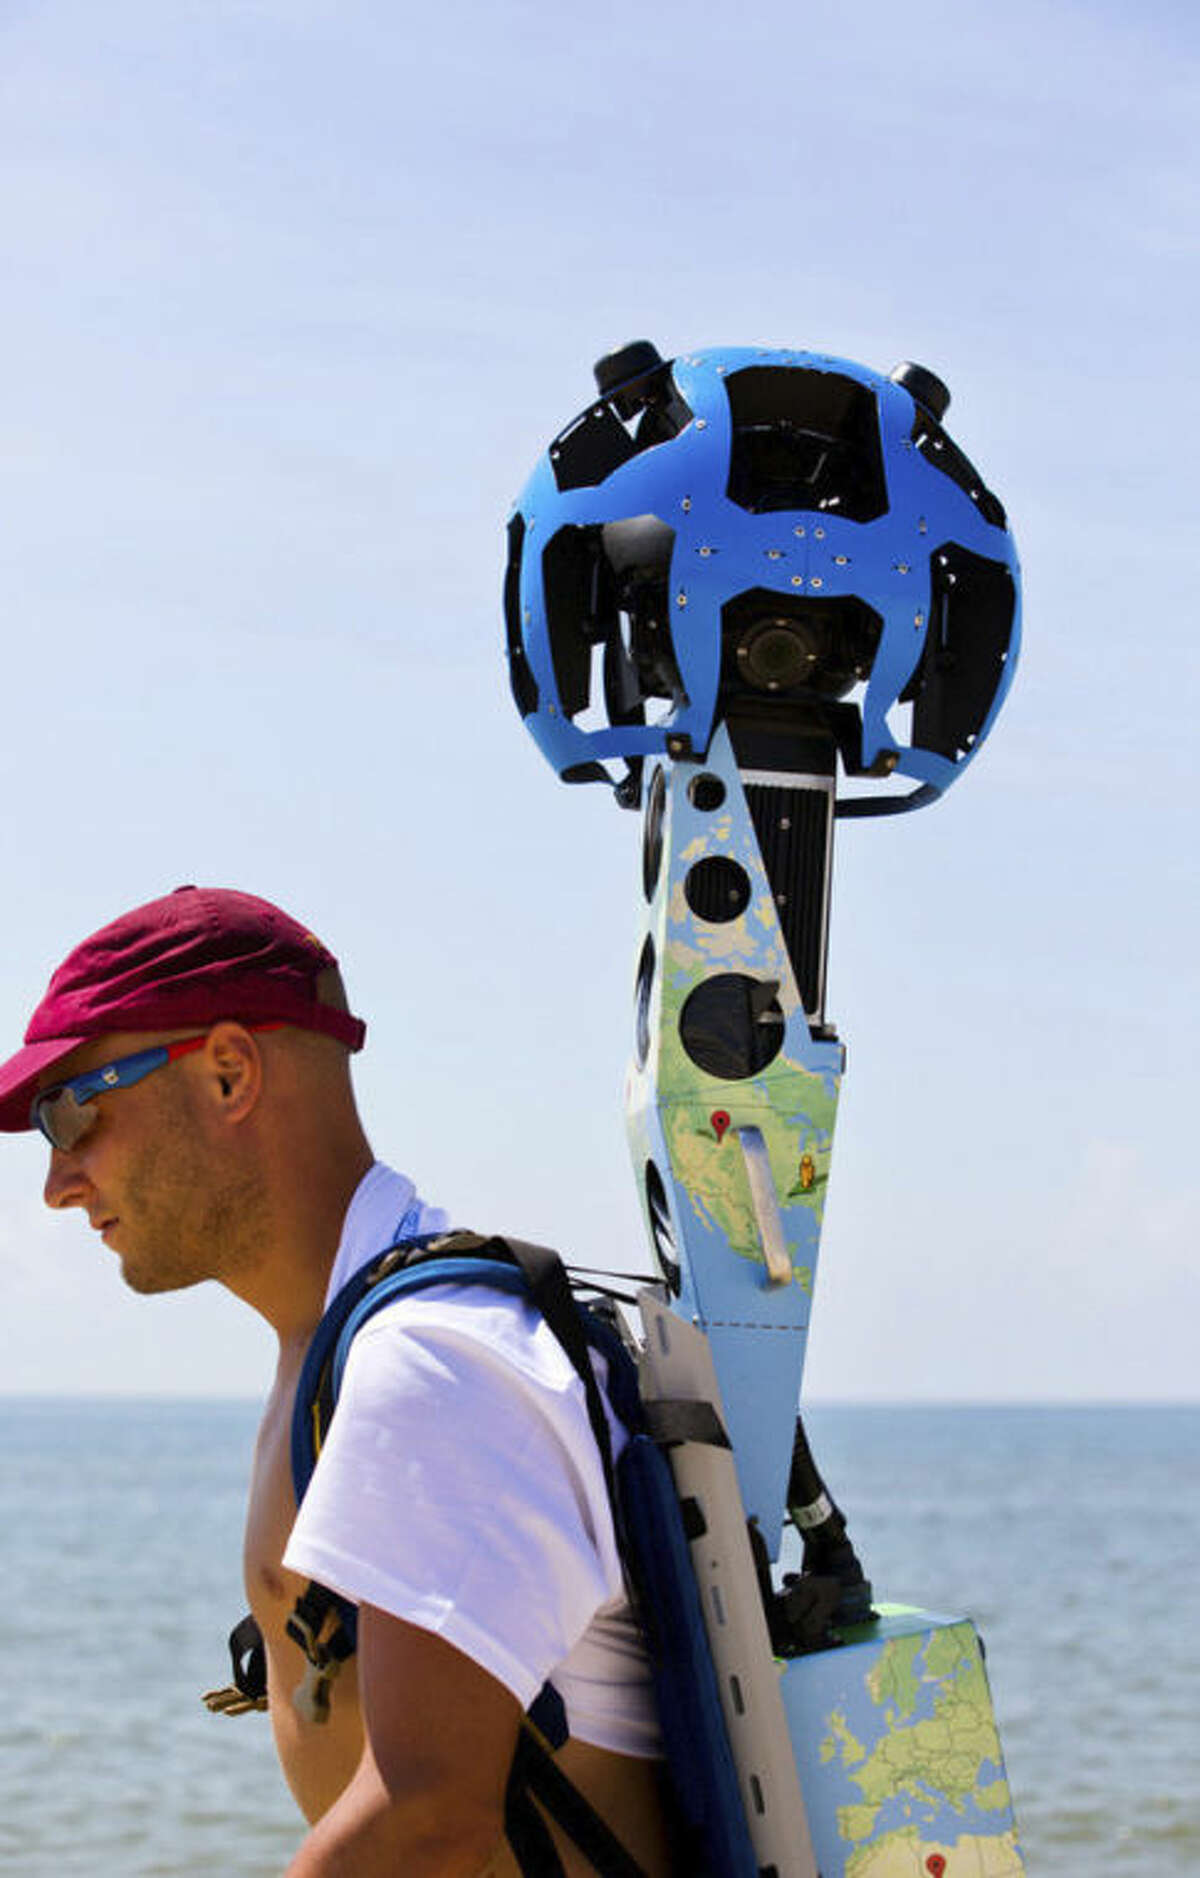 In this photo taken July 30, 2013, and made available by Visit Florida, Chris Officer carries a Google street view camera as he walks recording St. George Island beach in the Florida Panhandle. Visit Florida, the state's tourism agency, partnered with Google in the effort to map all 825 miles of Florida?’s beaches. The Florida project is the first large-scale beach mapping project. (AP Photo/Visit Florida, Colin Hackley)